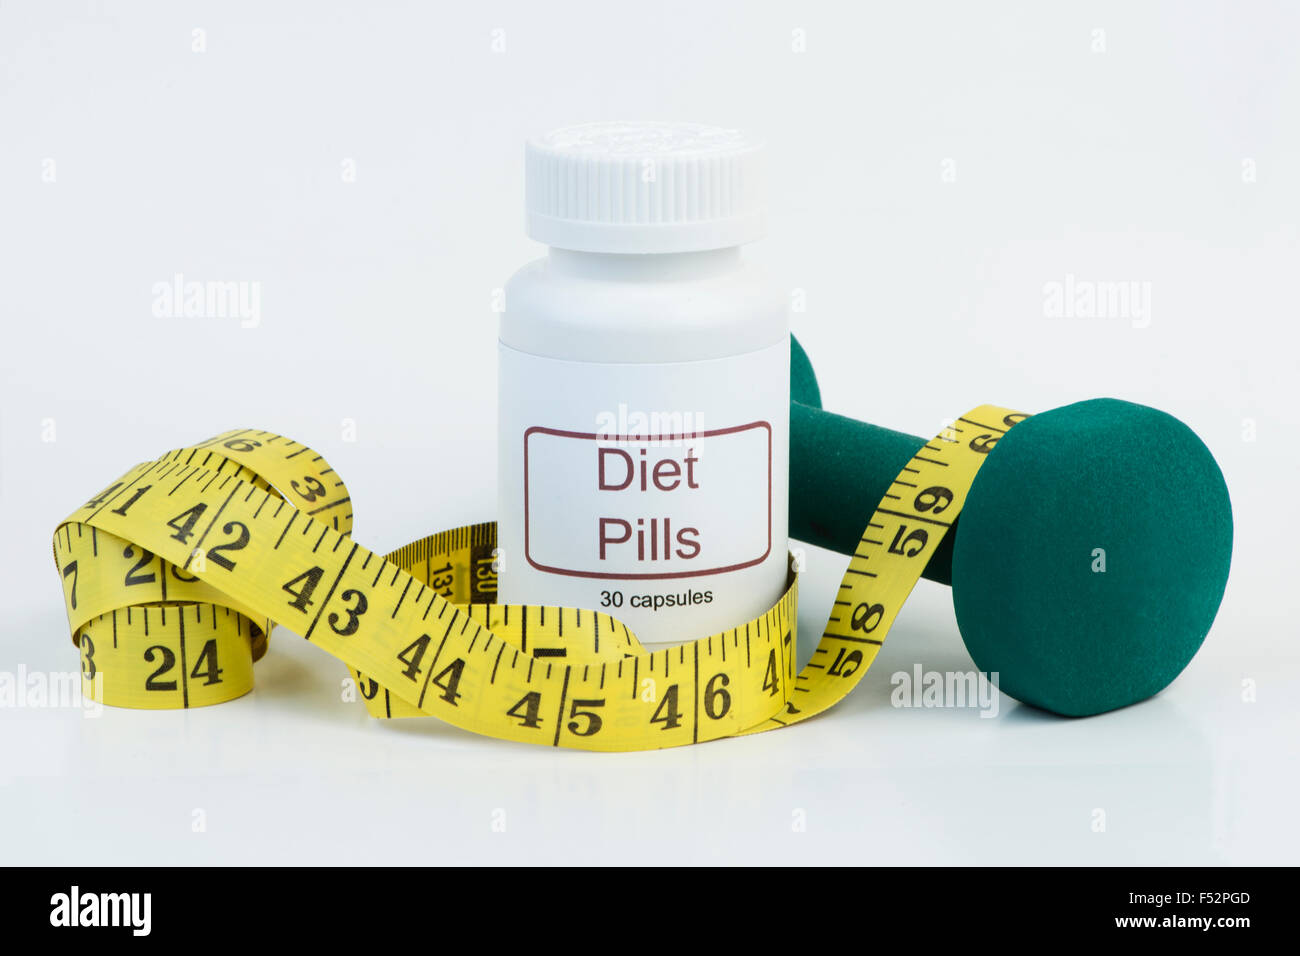 Container of diet pills with yellow tape measure and weight. Stock Photo